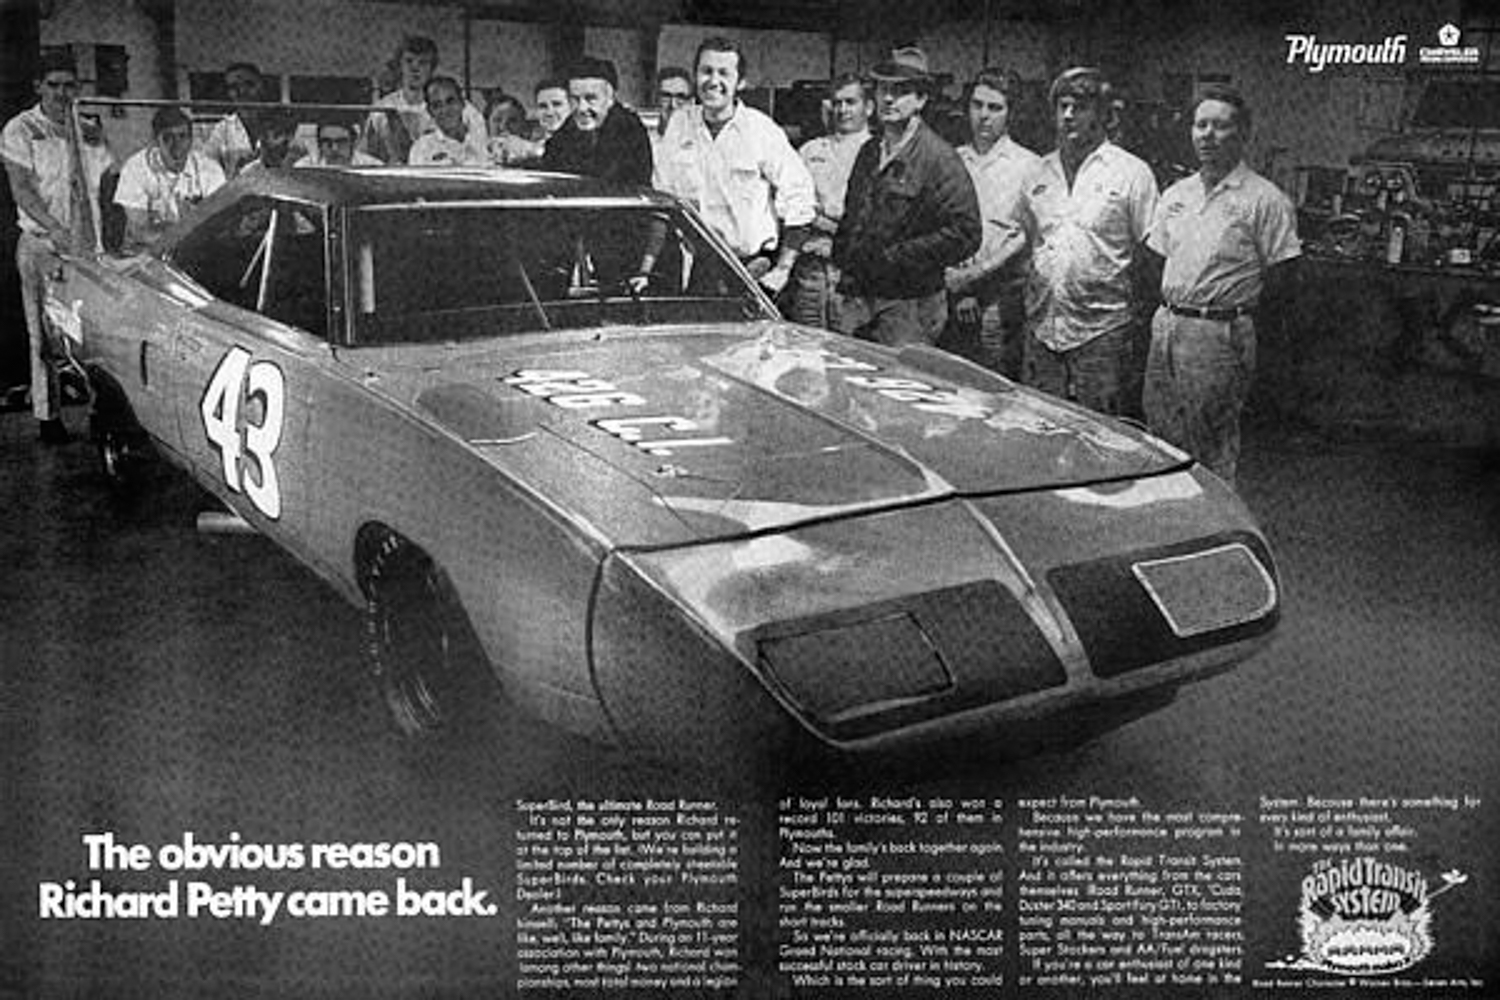 Plymouth decided to build a winged car for 1970, and Richard Petty returned to the fold from Ford. 